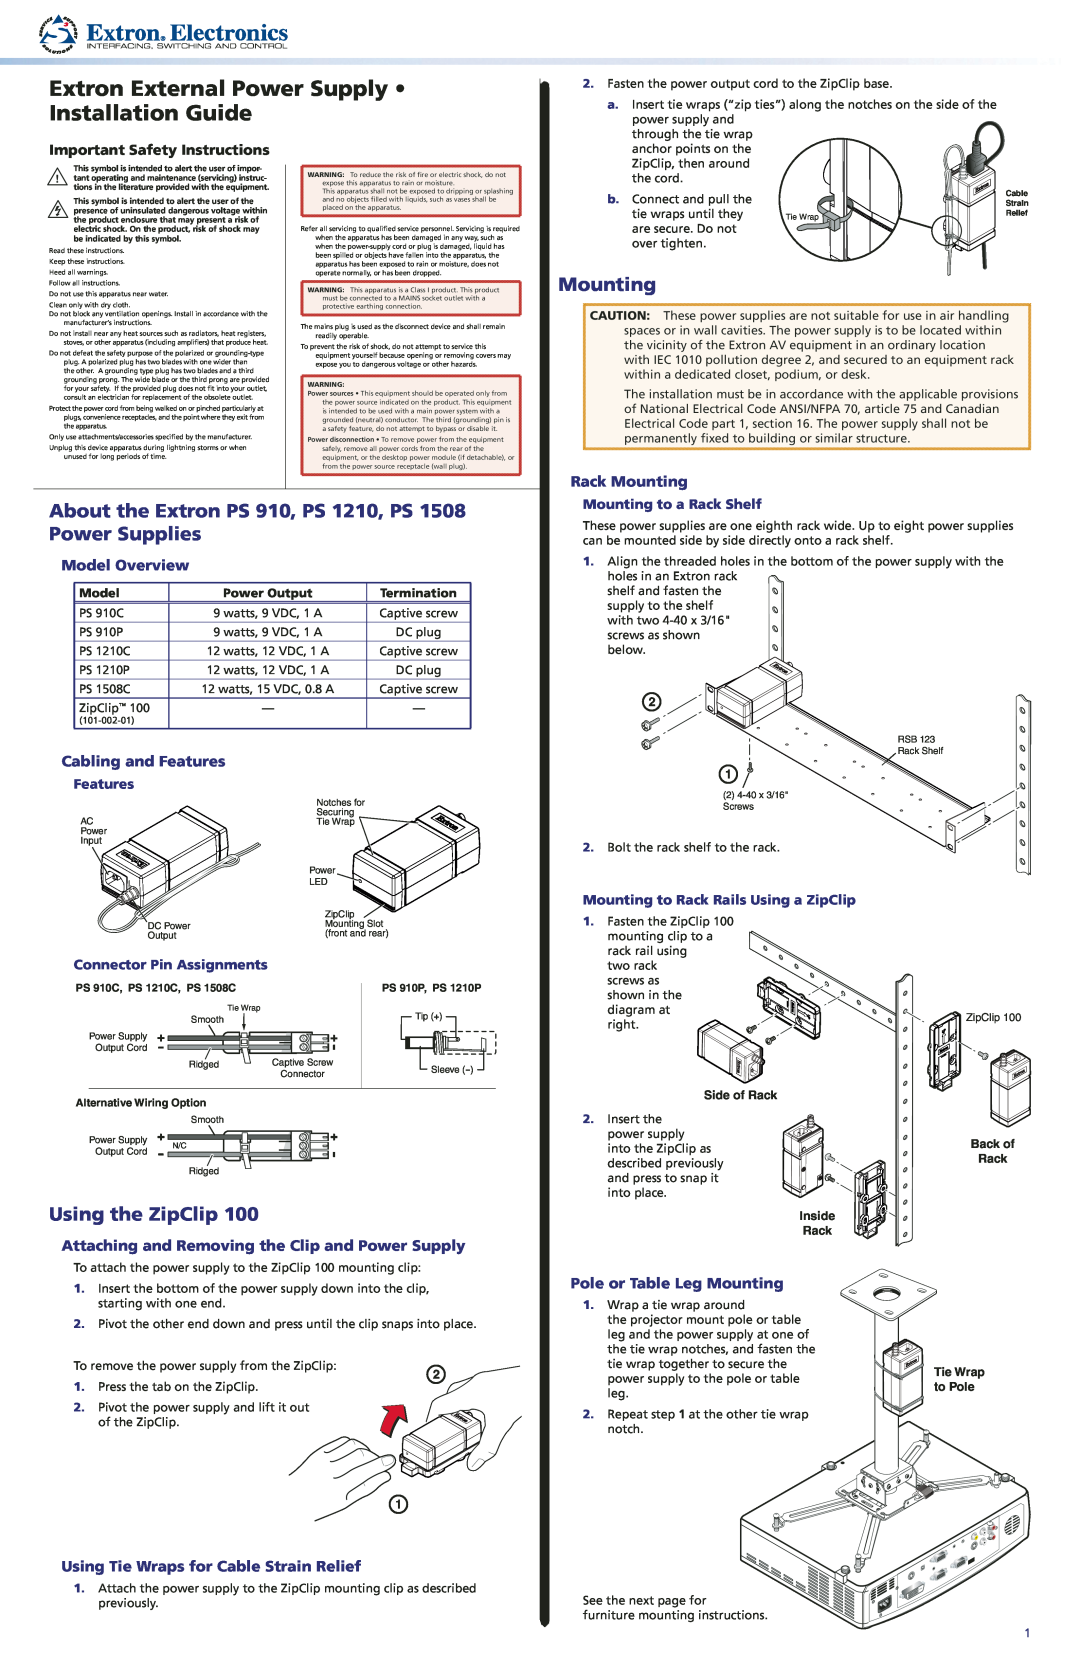 Extron electronic PS 1508 important safety instructions Extron External Power Supply Installation Guide, Mounting, Model 